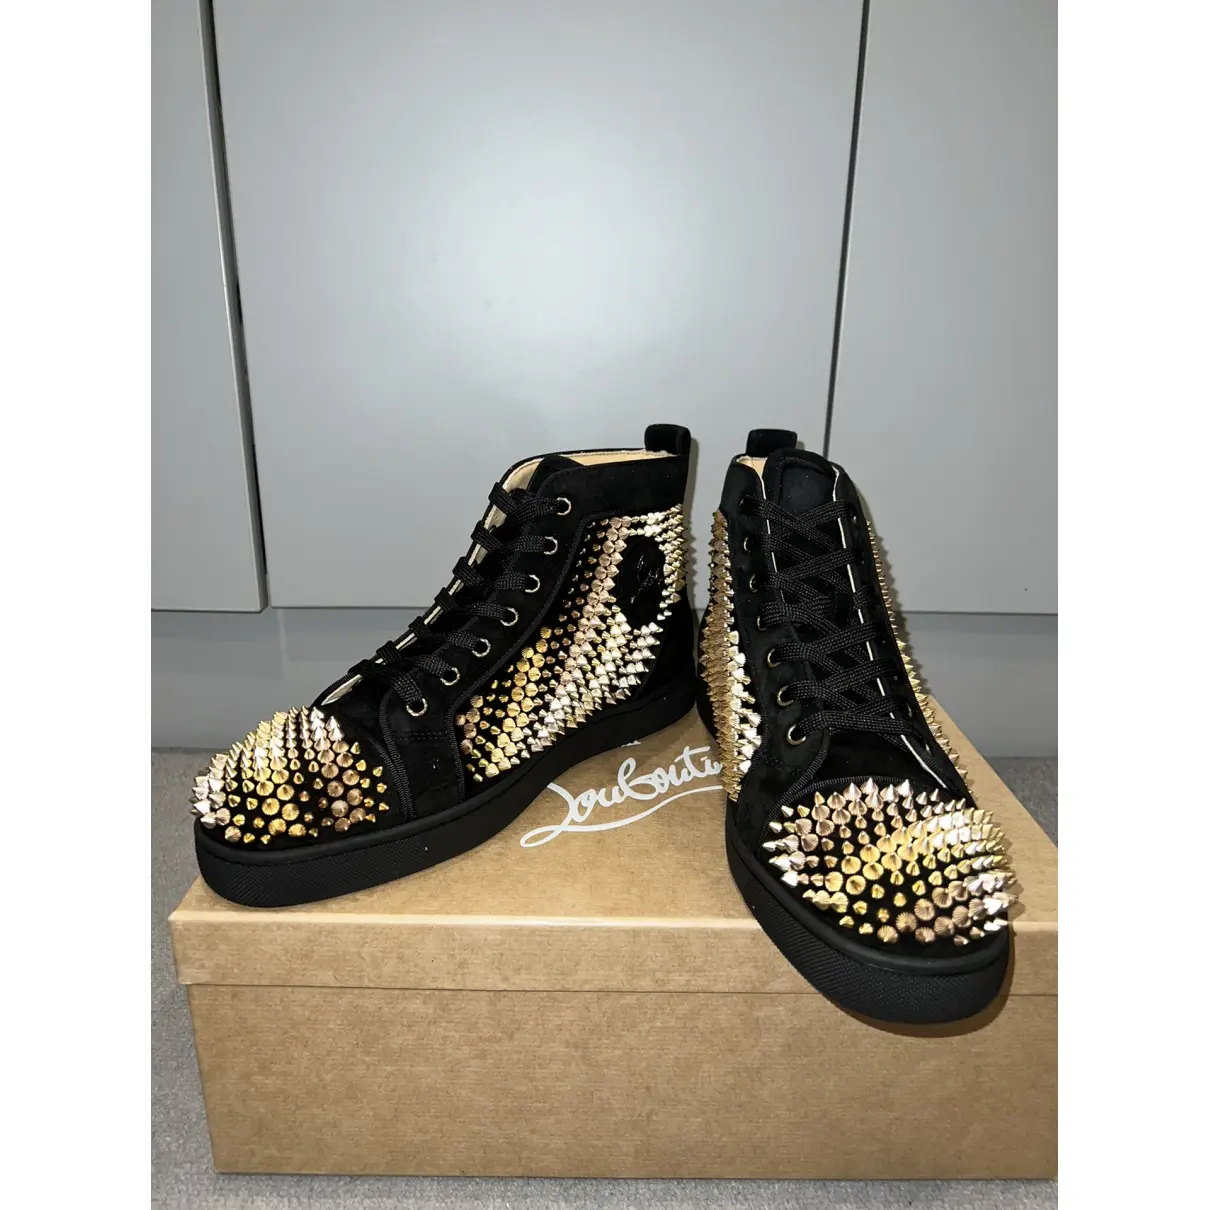 Buy Christian Louboutin Louis high trainers online